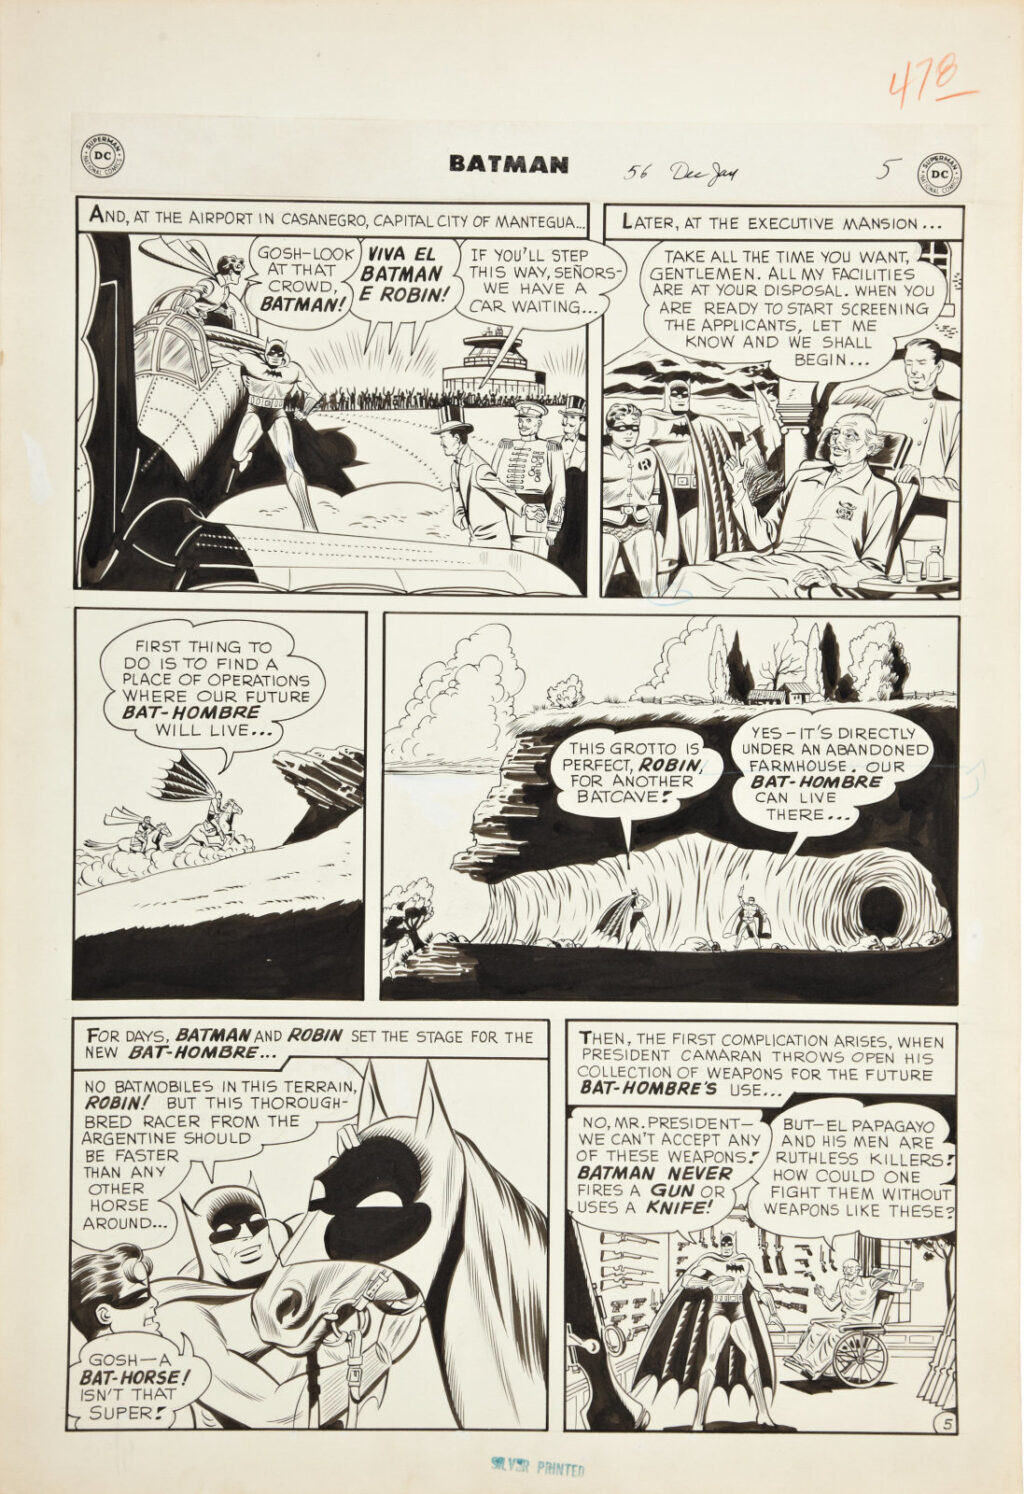 Batman issue 56 page 5 by Dick Sprang and Charles Paris